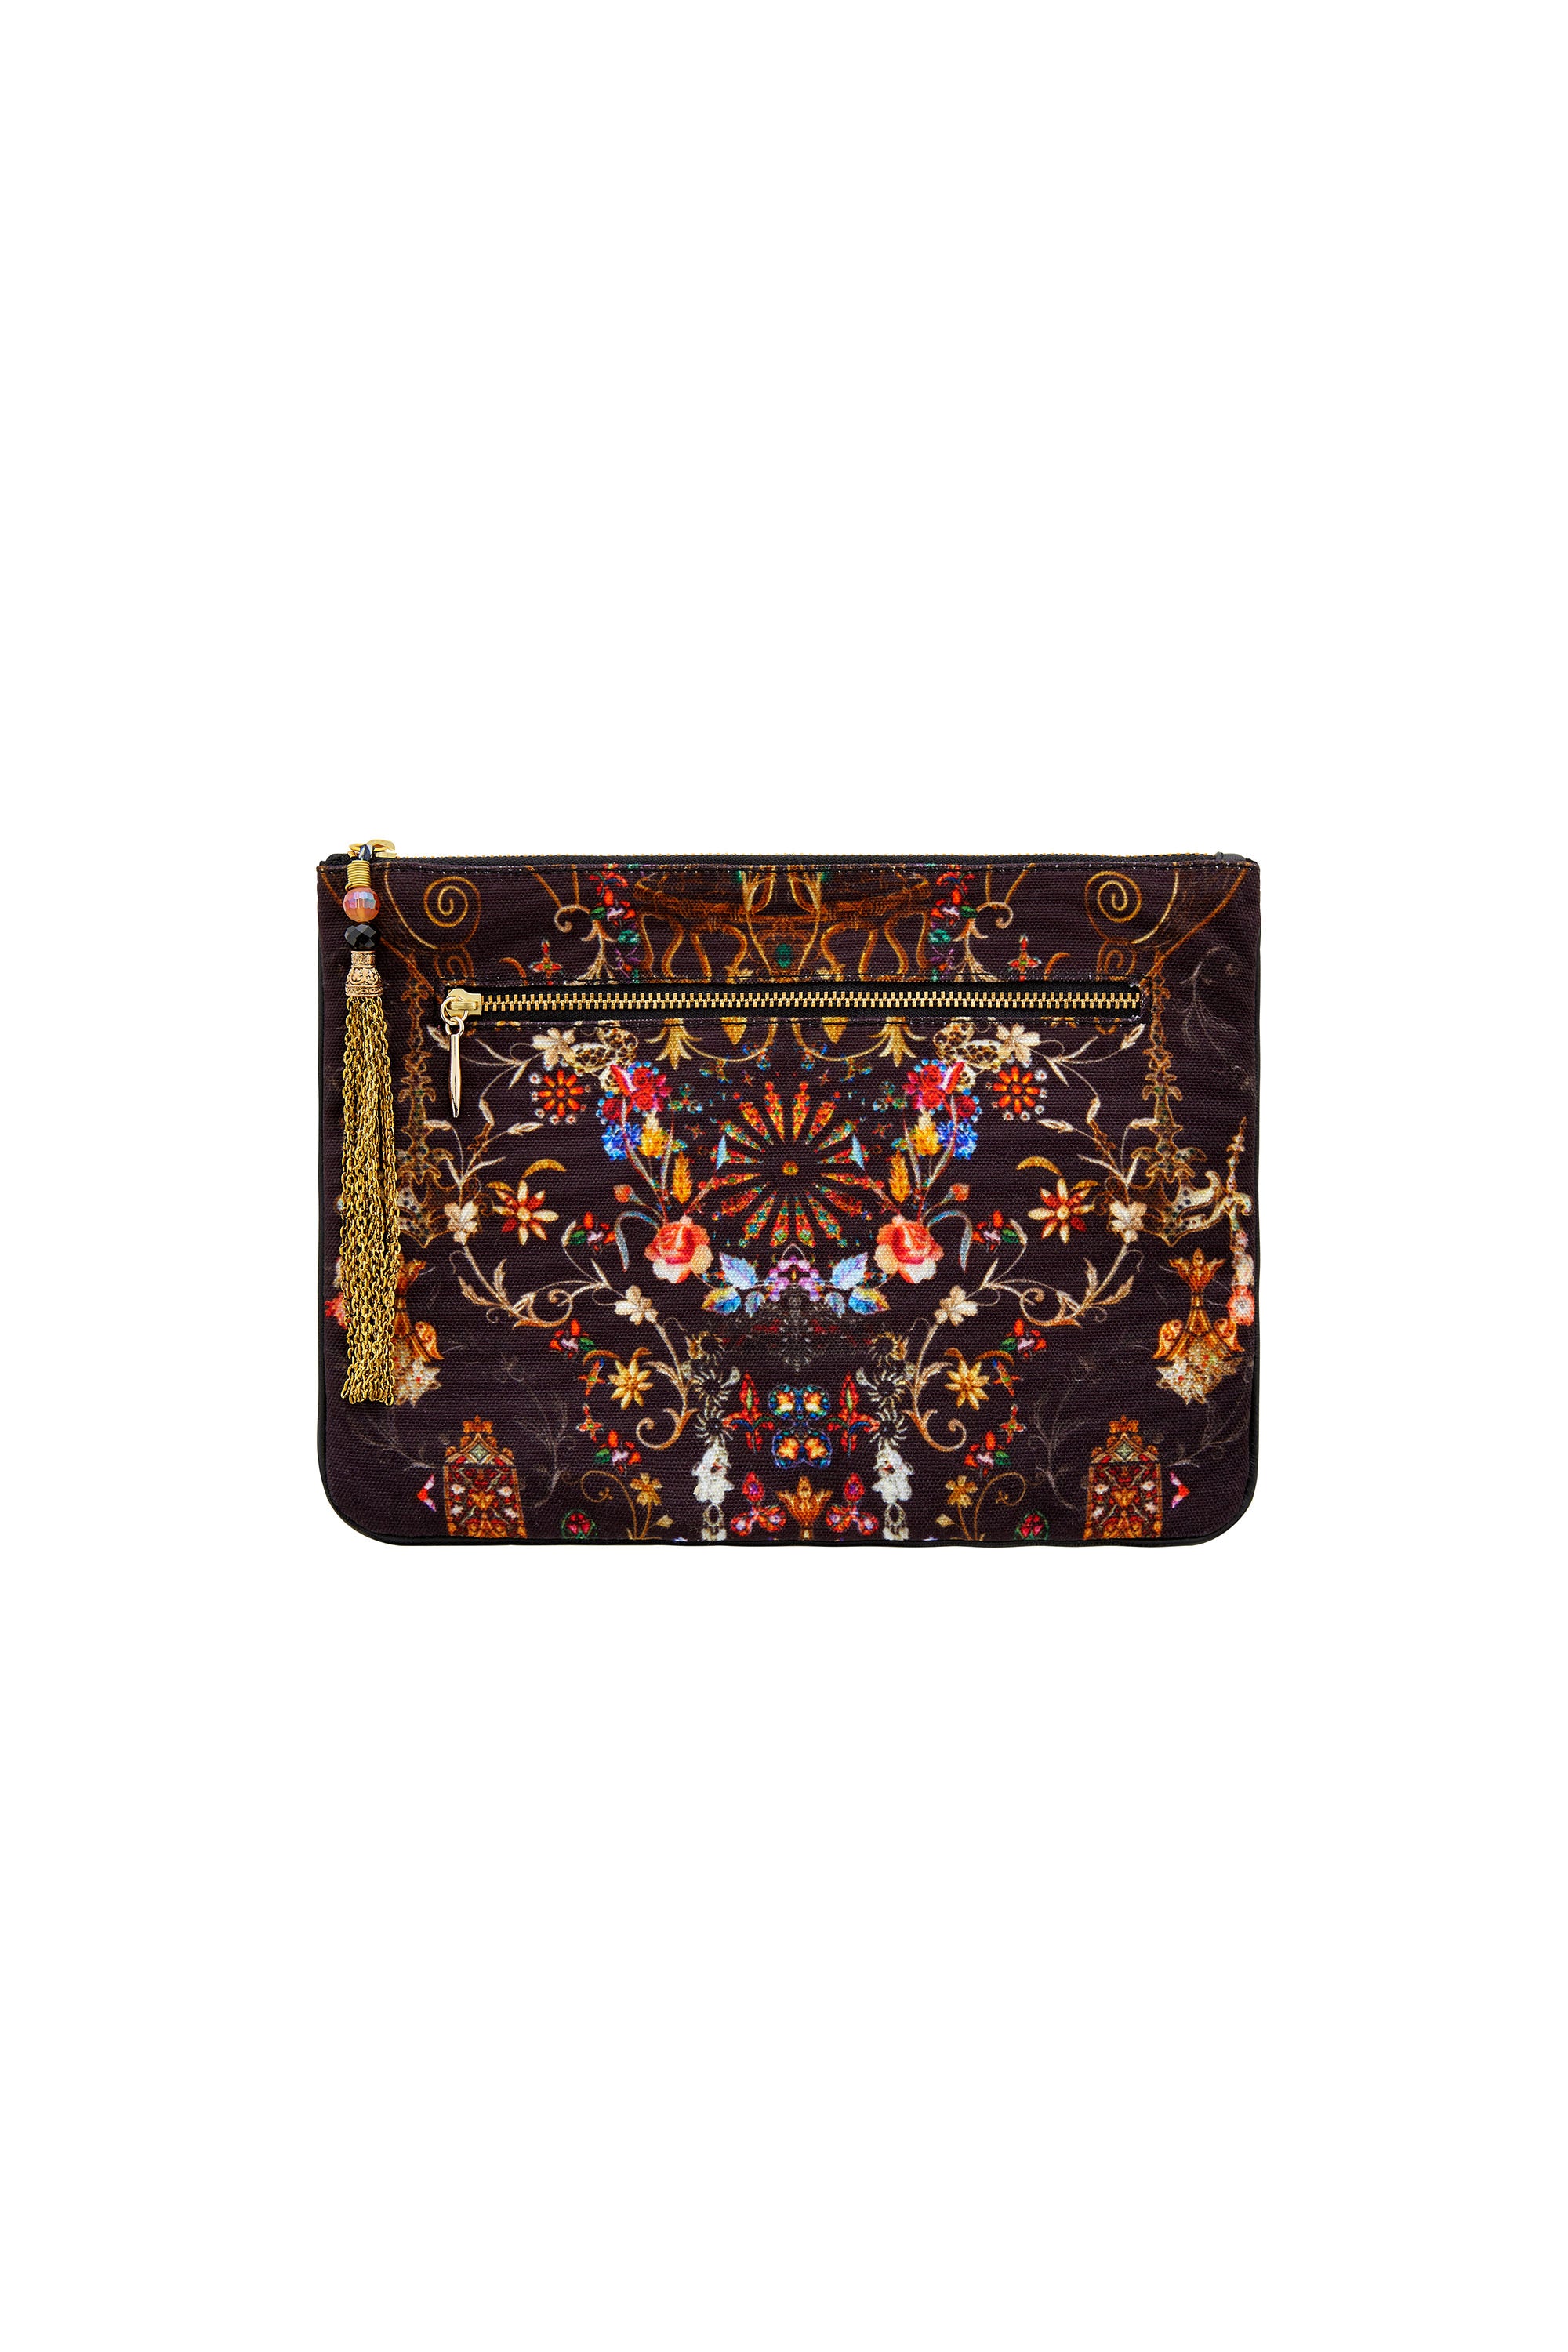 DANCING IN THE DARK SMALL CANVAS CLUTCH